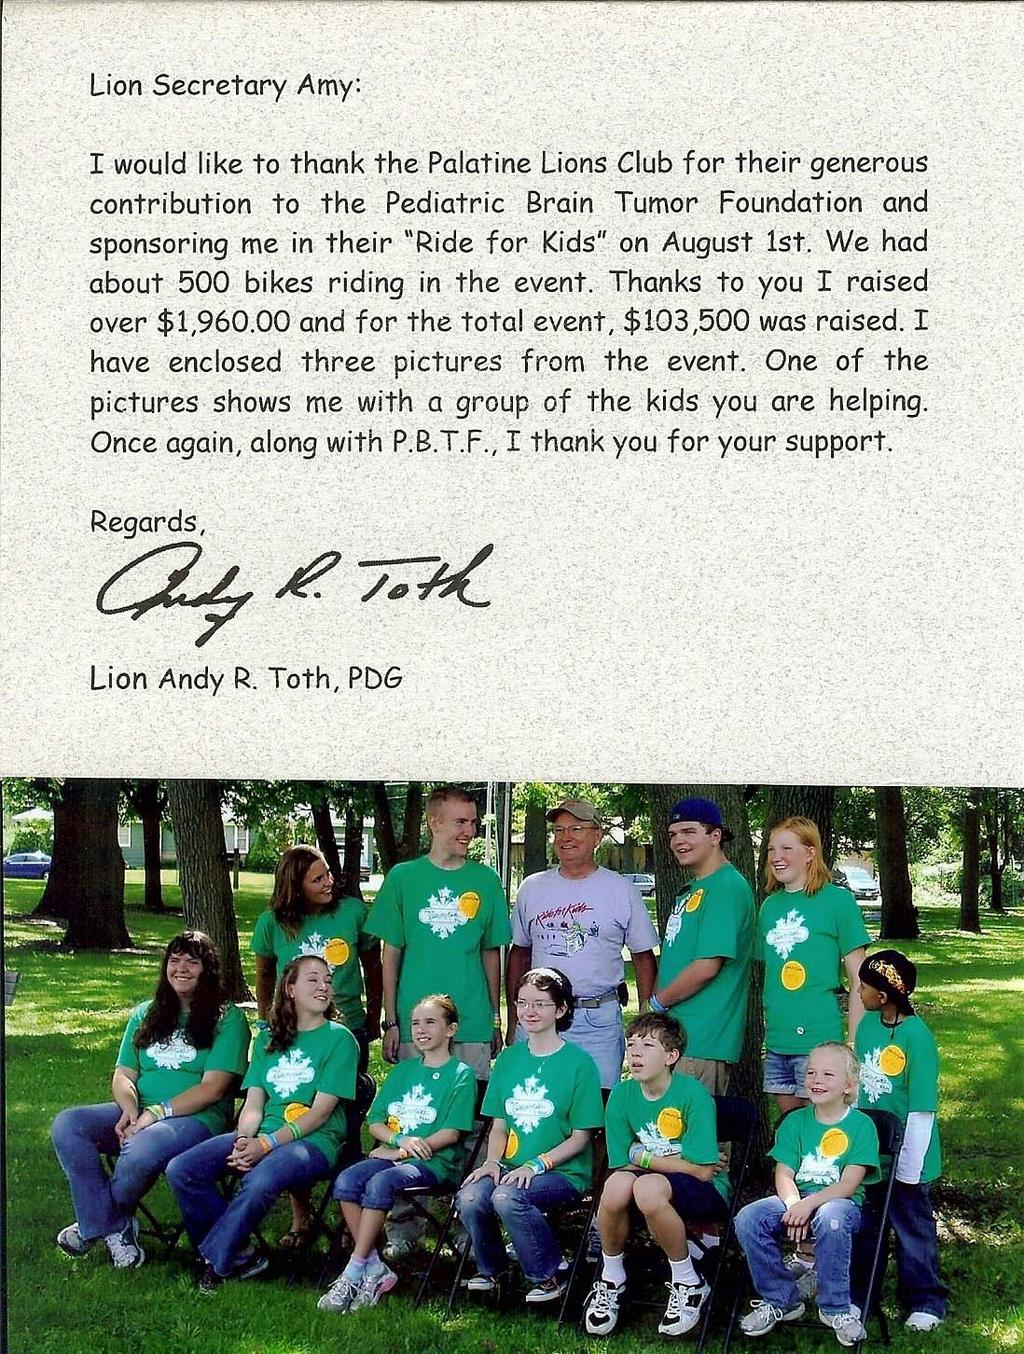 Volume 4, Issue 1 Page 5 Many of you may remember when Lion Andy Toth, Past District Governor from the Vernon Hills Lions Club visited our Club and spoke about a project outside of Lions in which he